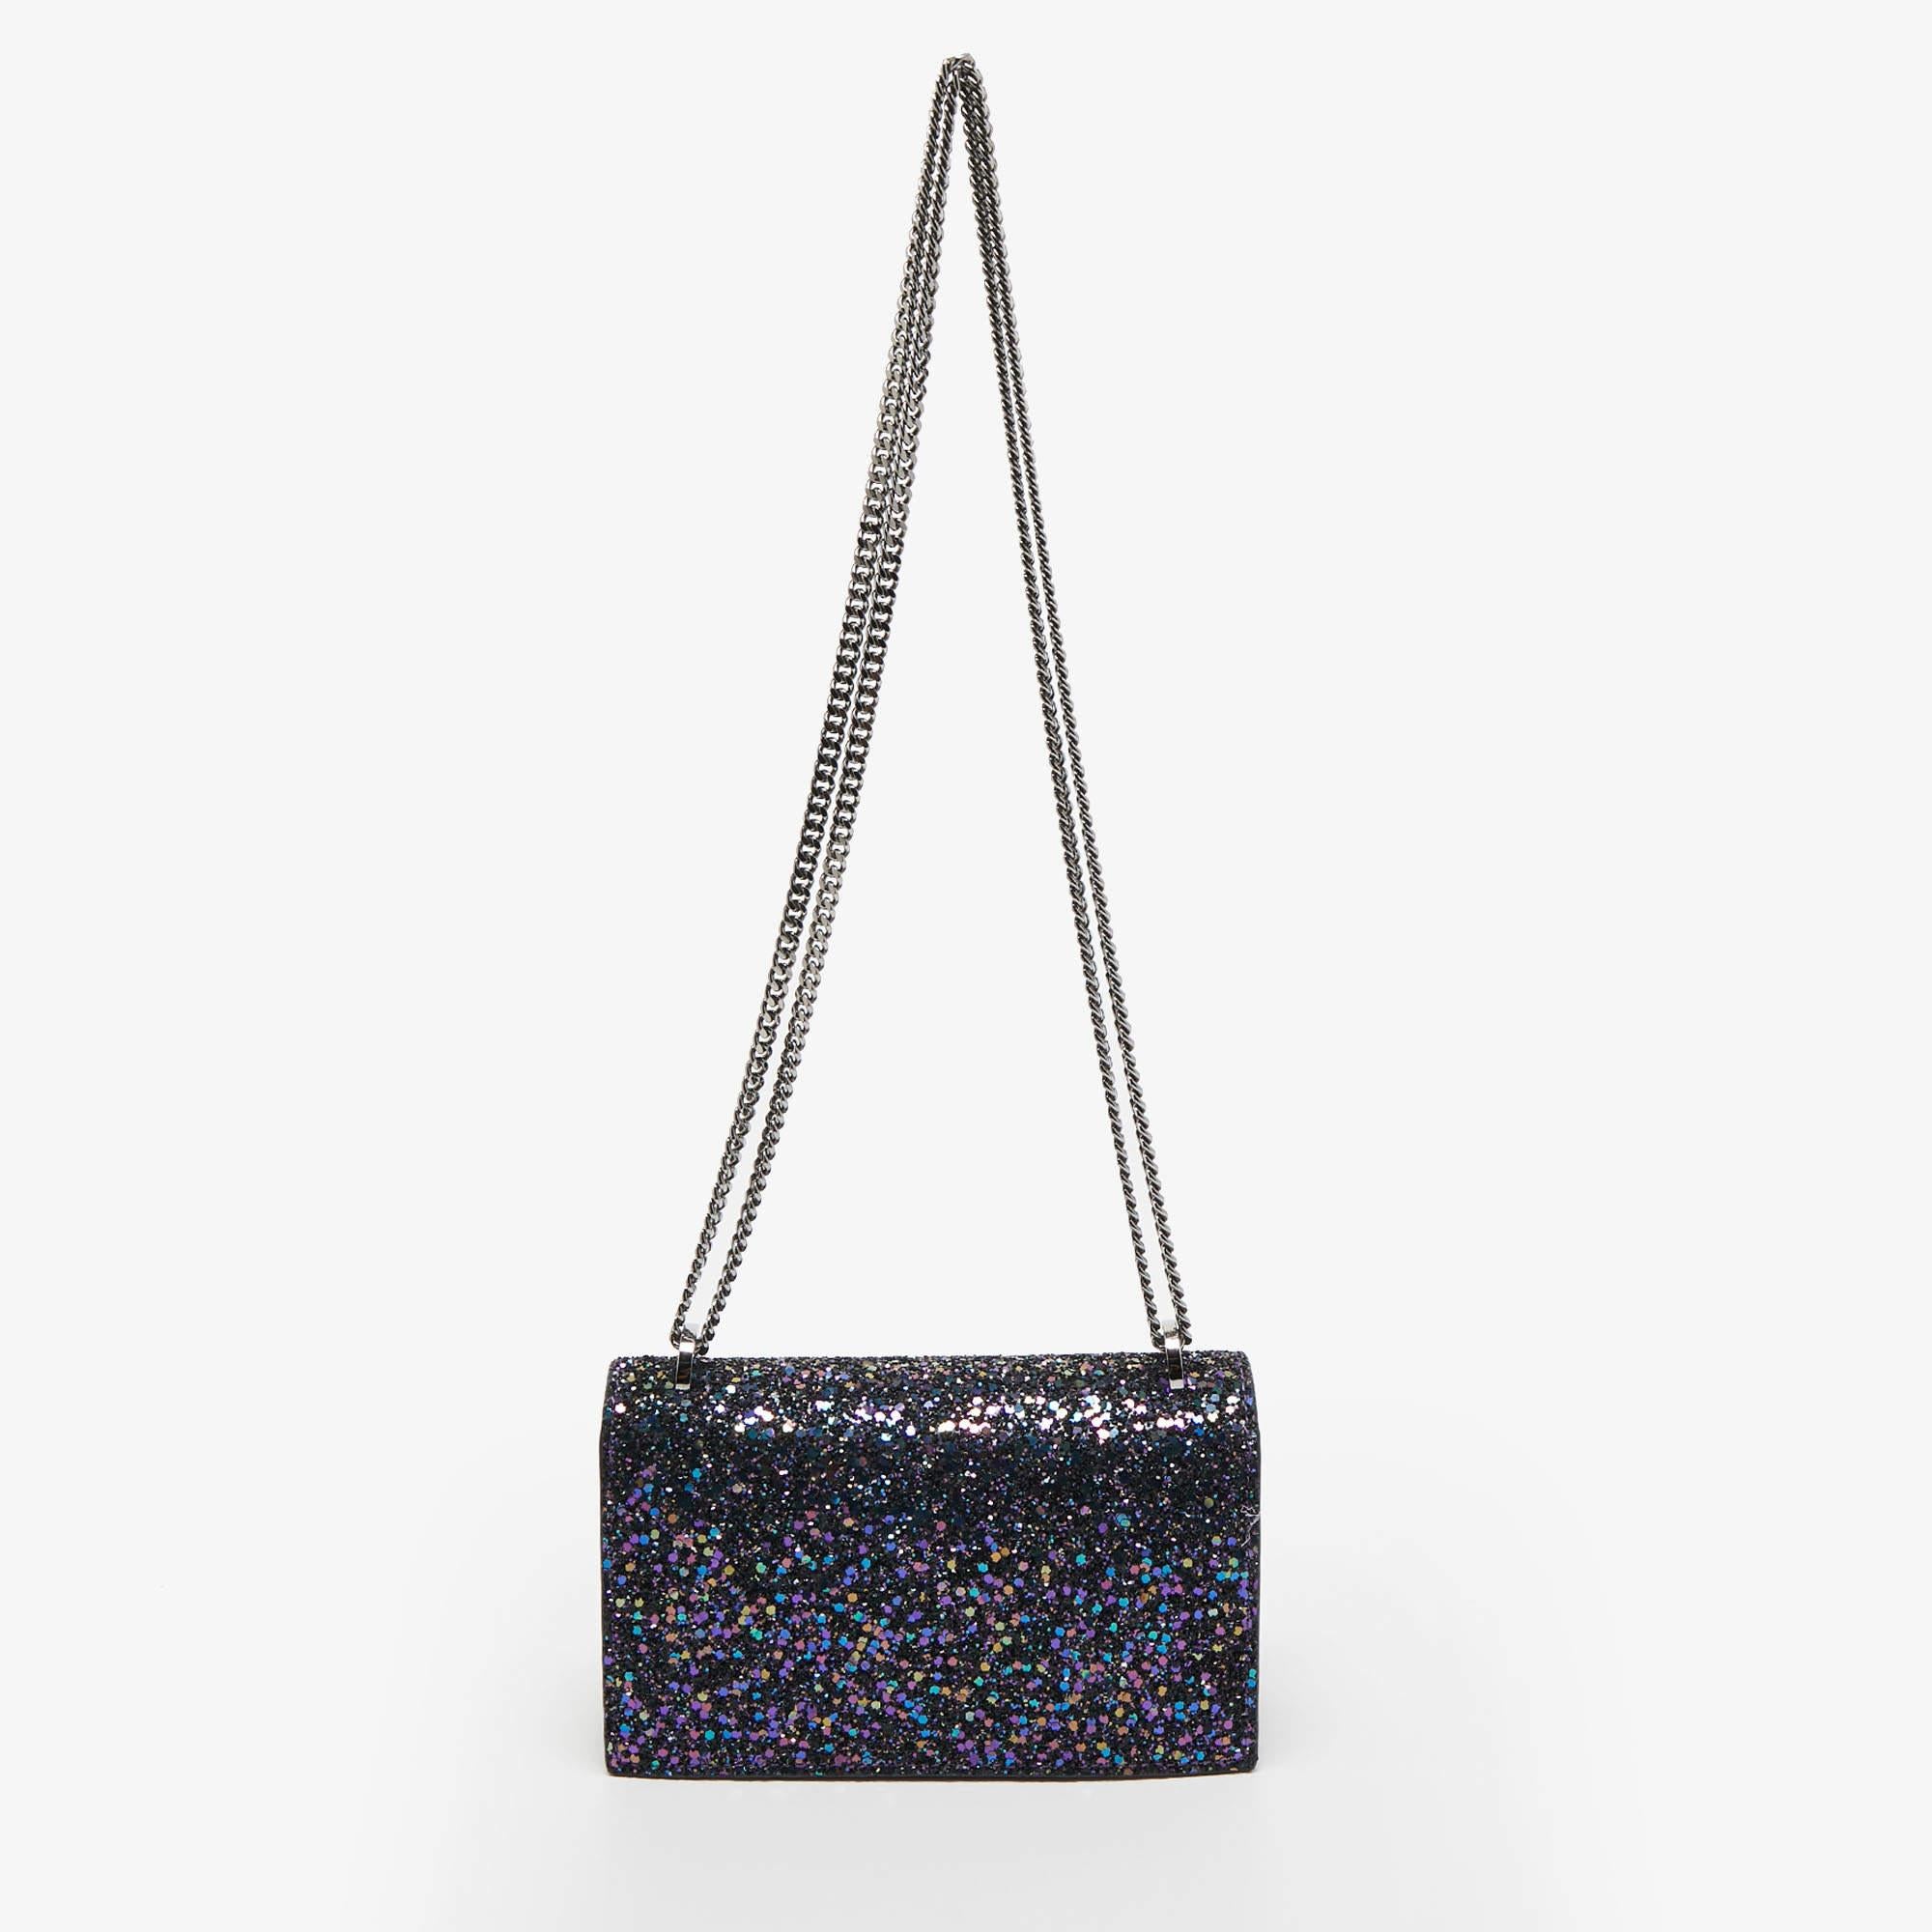 This bag from the house of Jimmy Choo is an accessory you would go to season after season. It has been crafted from glitter fabric into a flap style. It comes with a sliding chain and round tag details on the flap.

